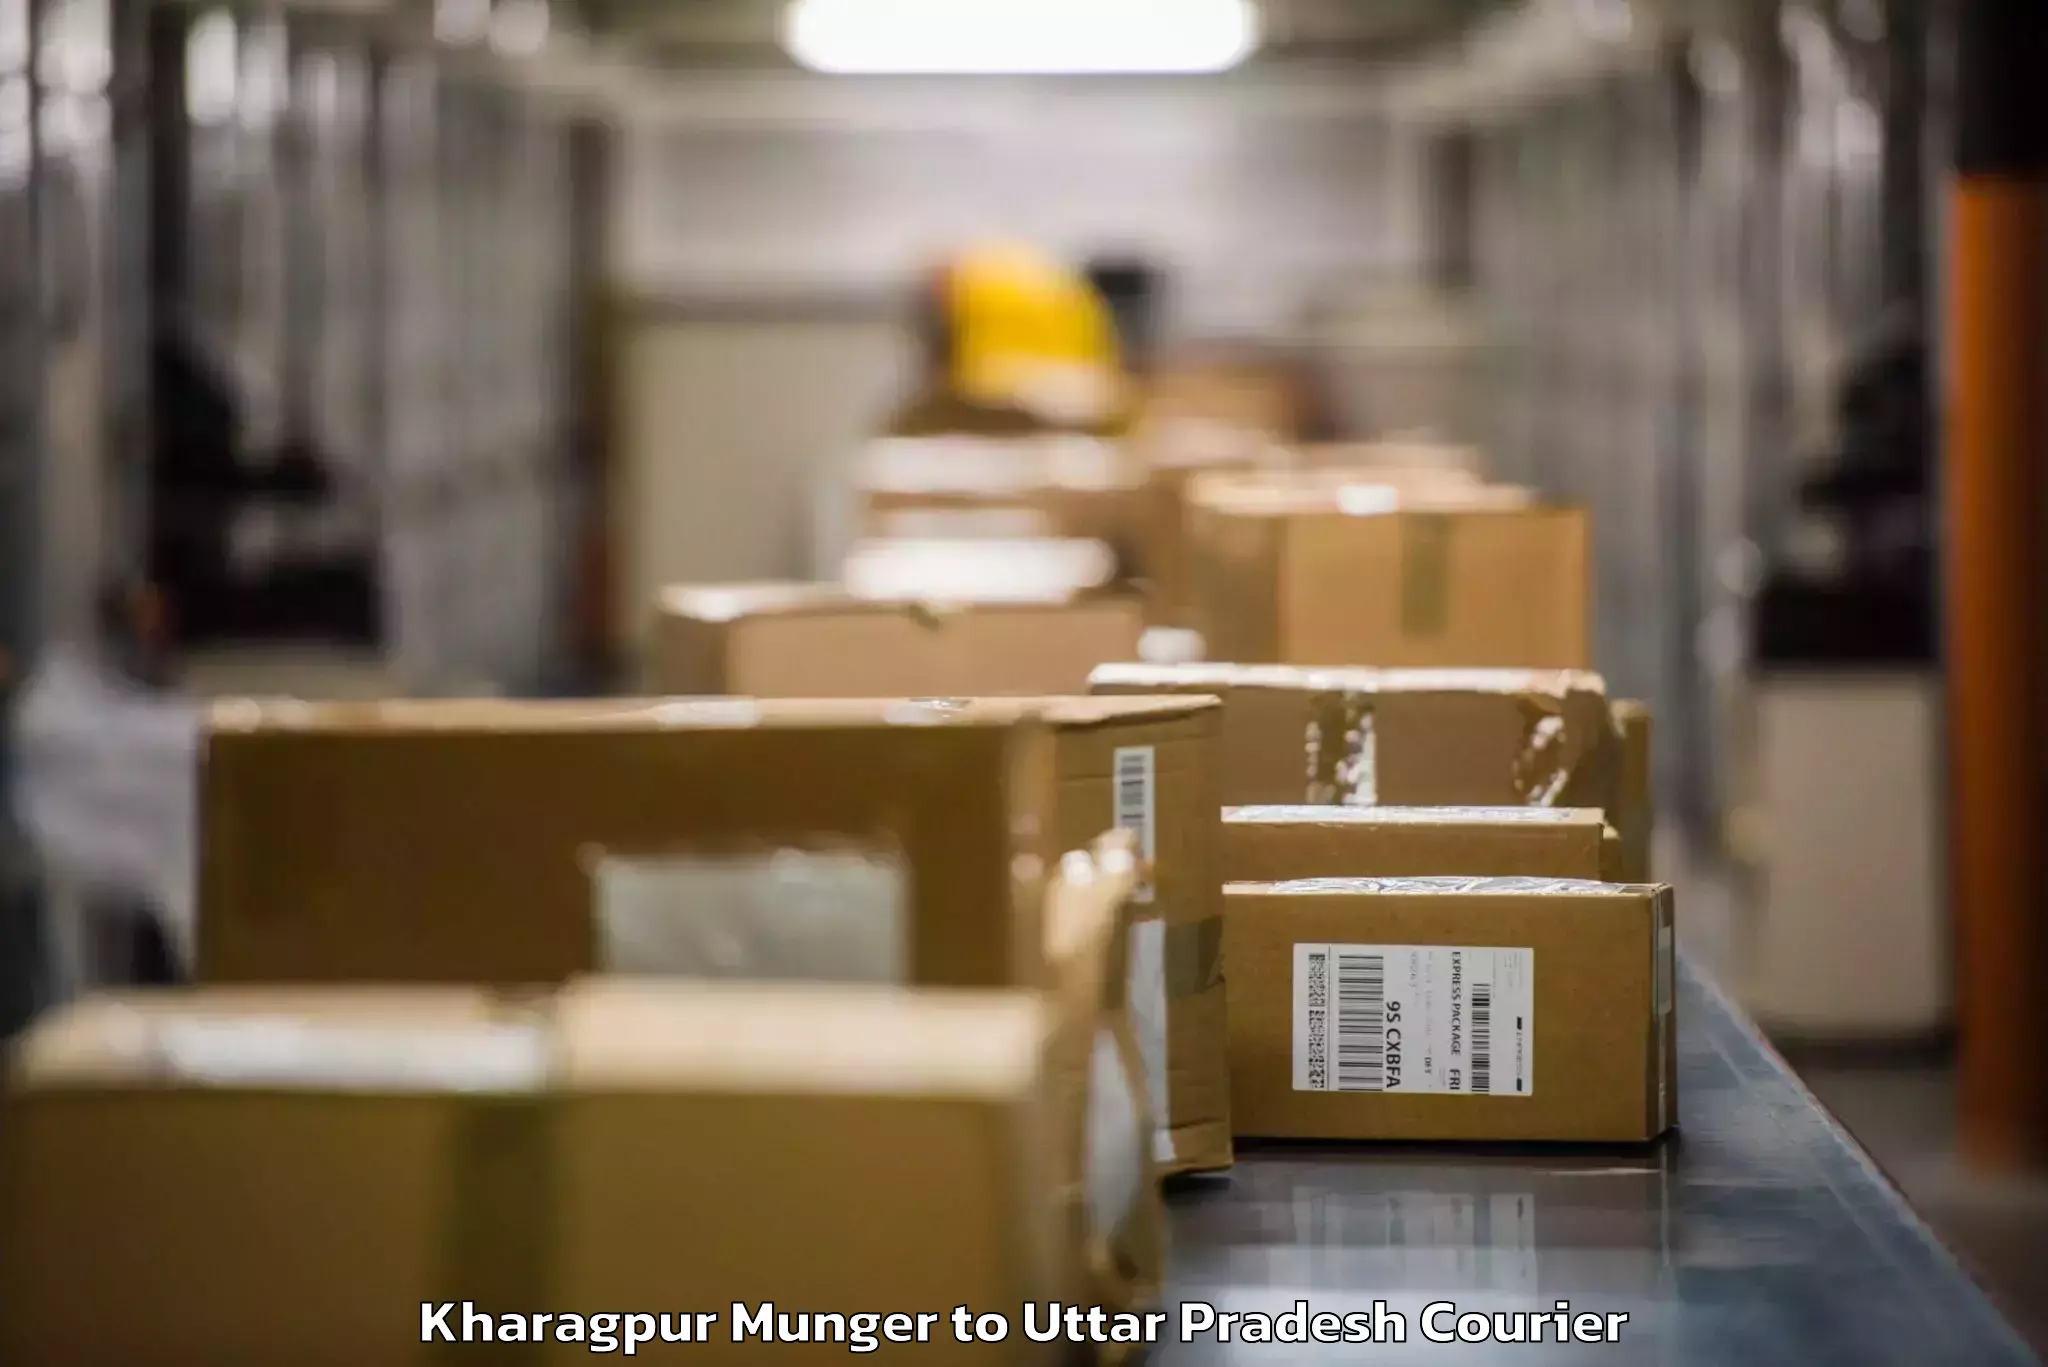 Baggage relocation service Kharagpur Munger to King Georges Medical University Lucknow